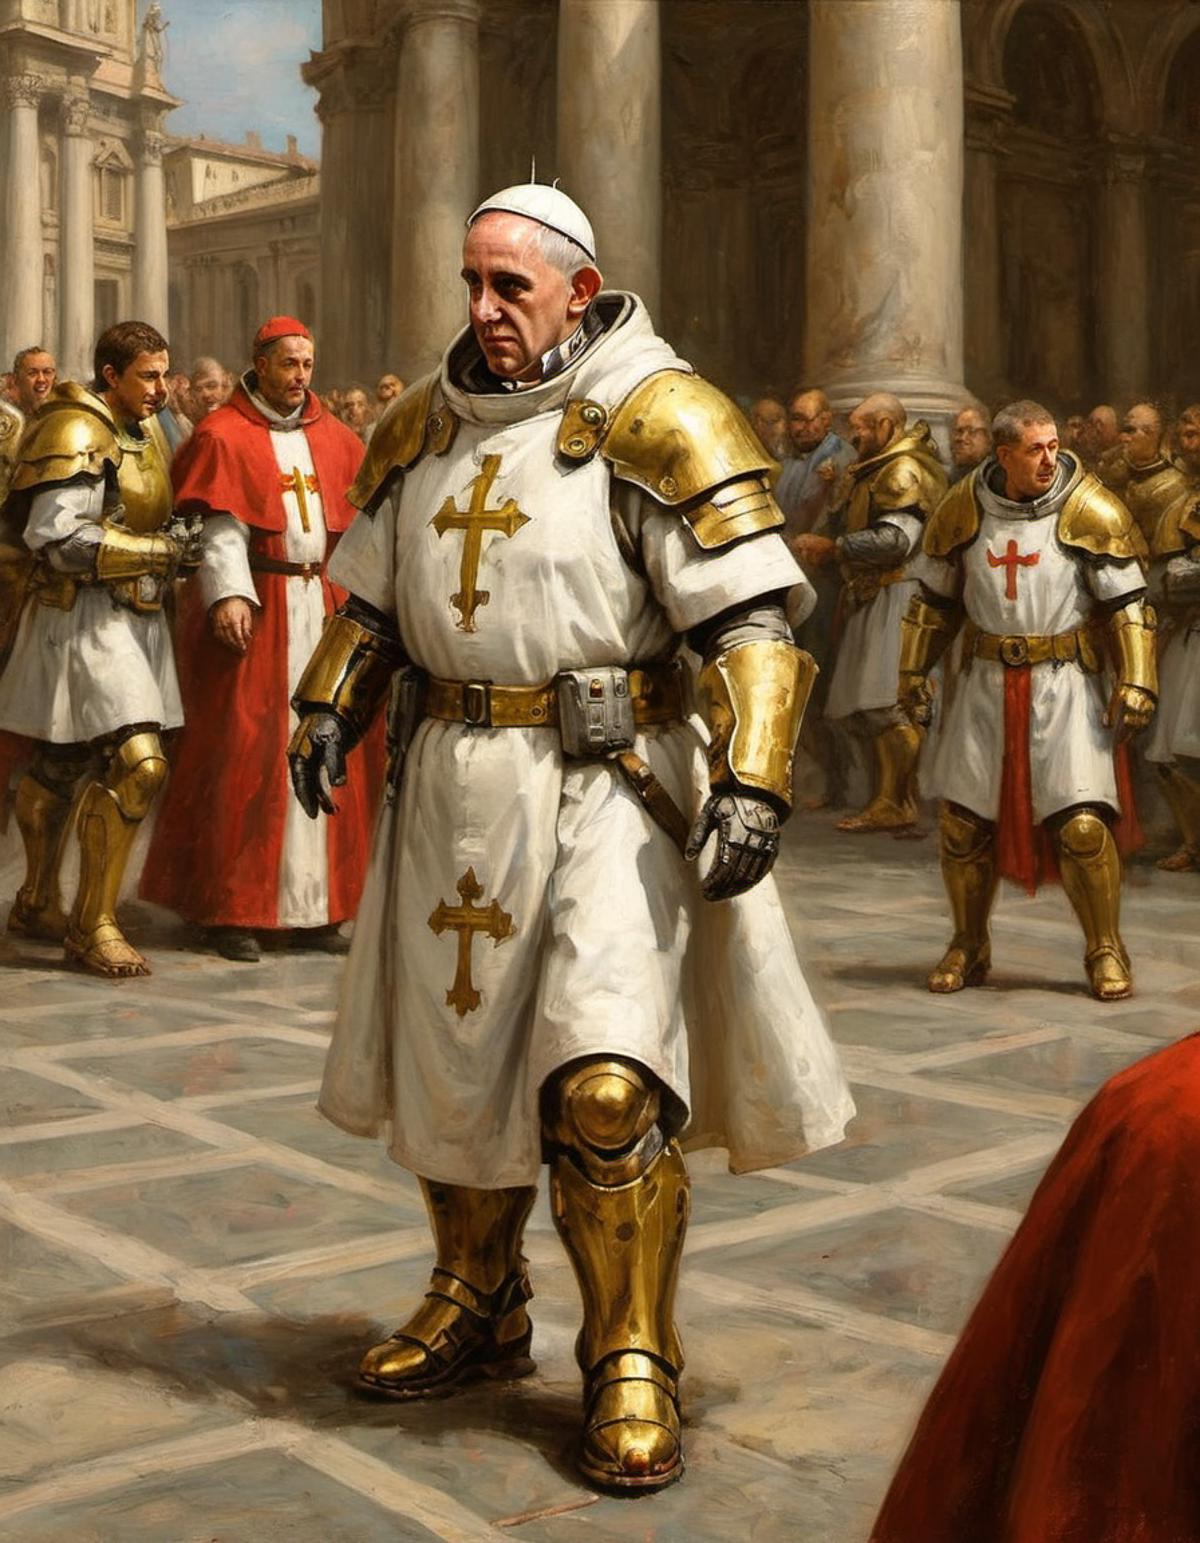 Pope wearing chain mail and holding a sword in a painting.